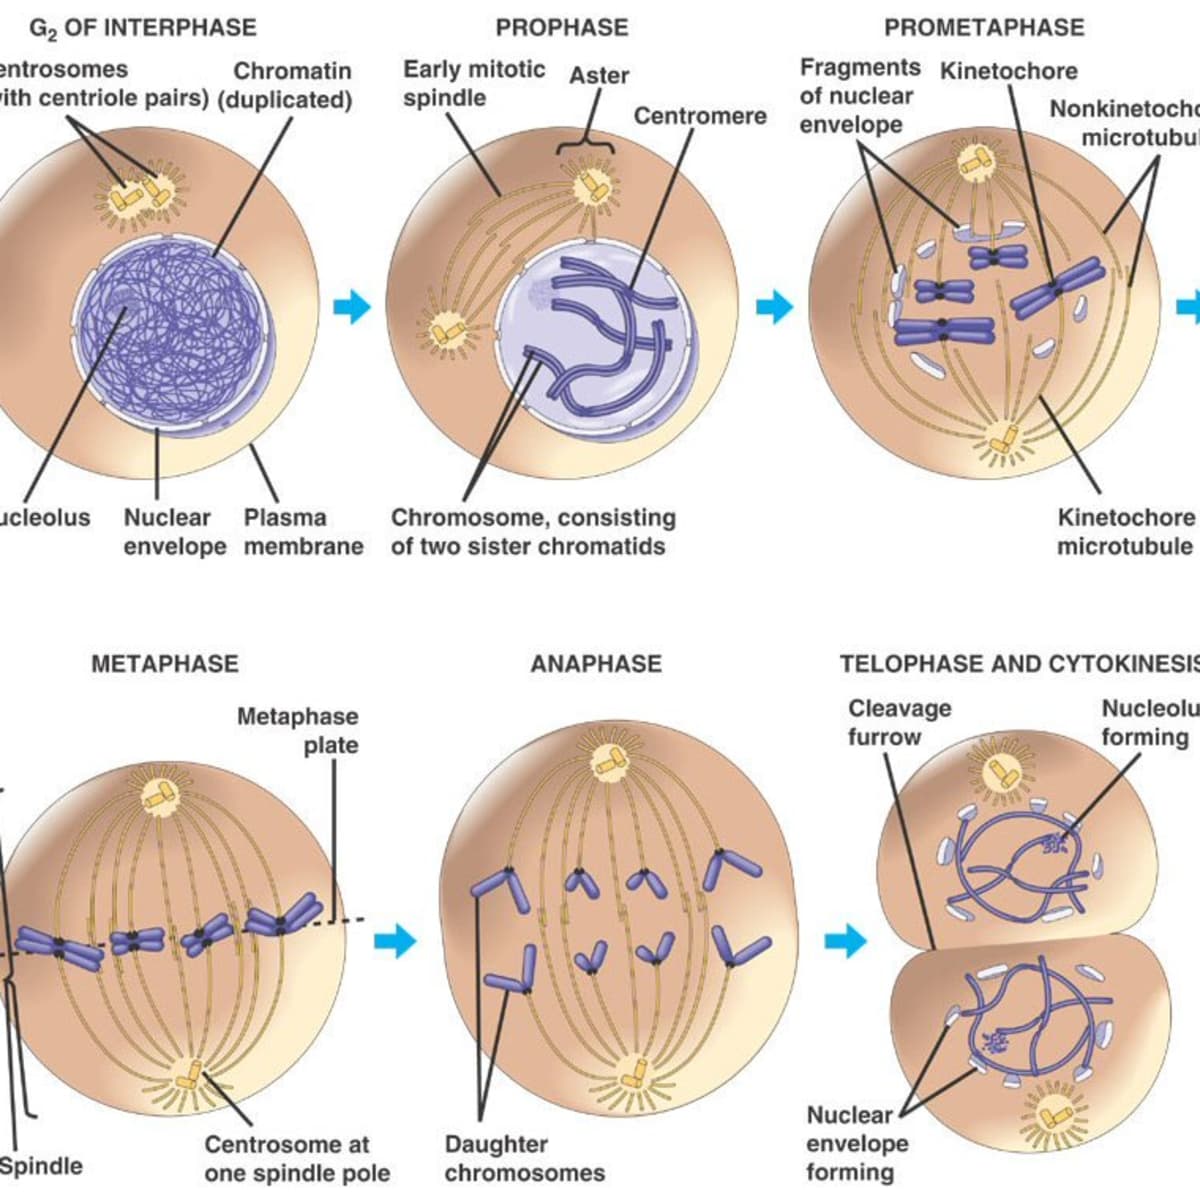 Stages of the Cell Cycle - Mitosis (Metaphase, Anaphase and Telophase) -  Owlcation